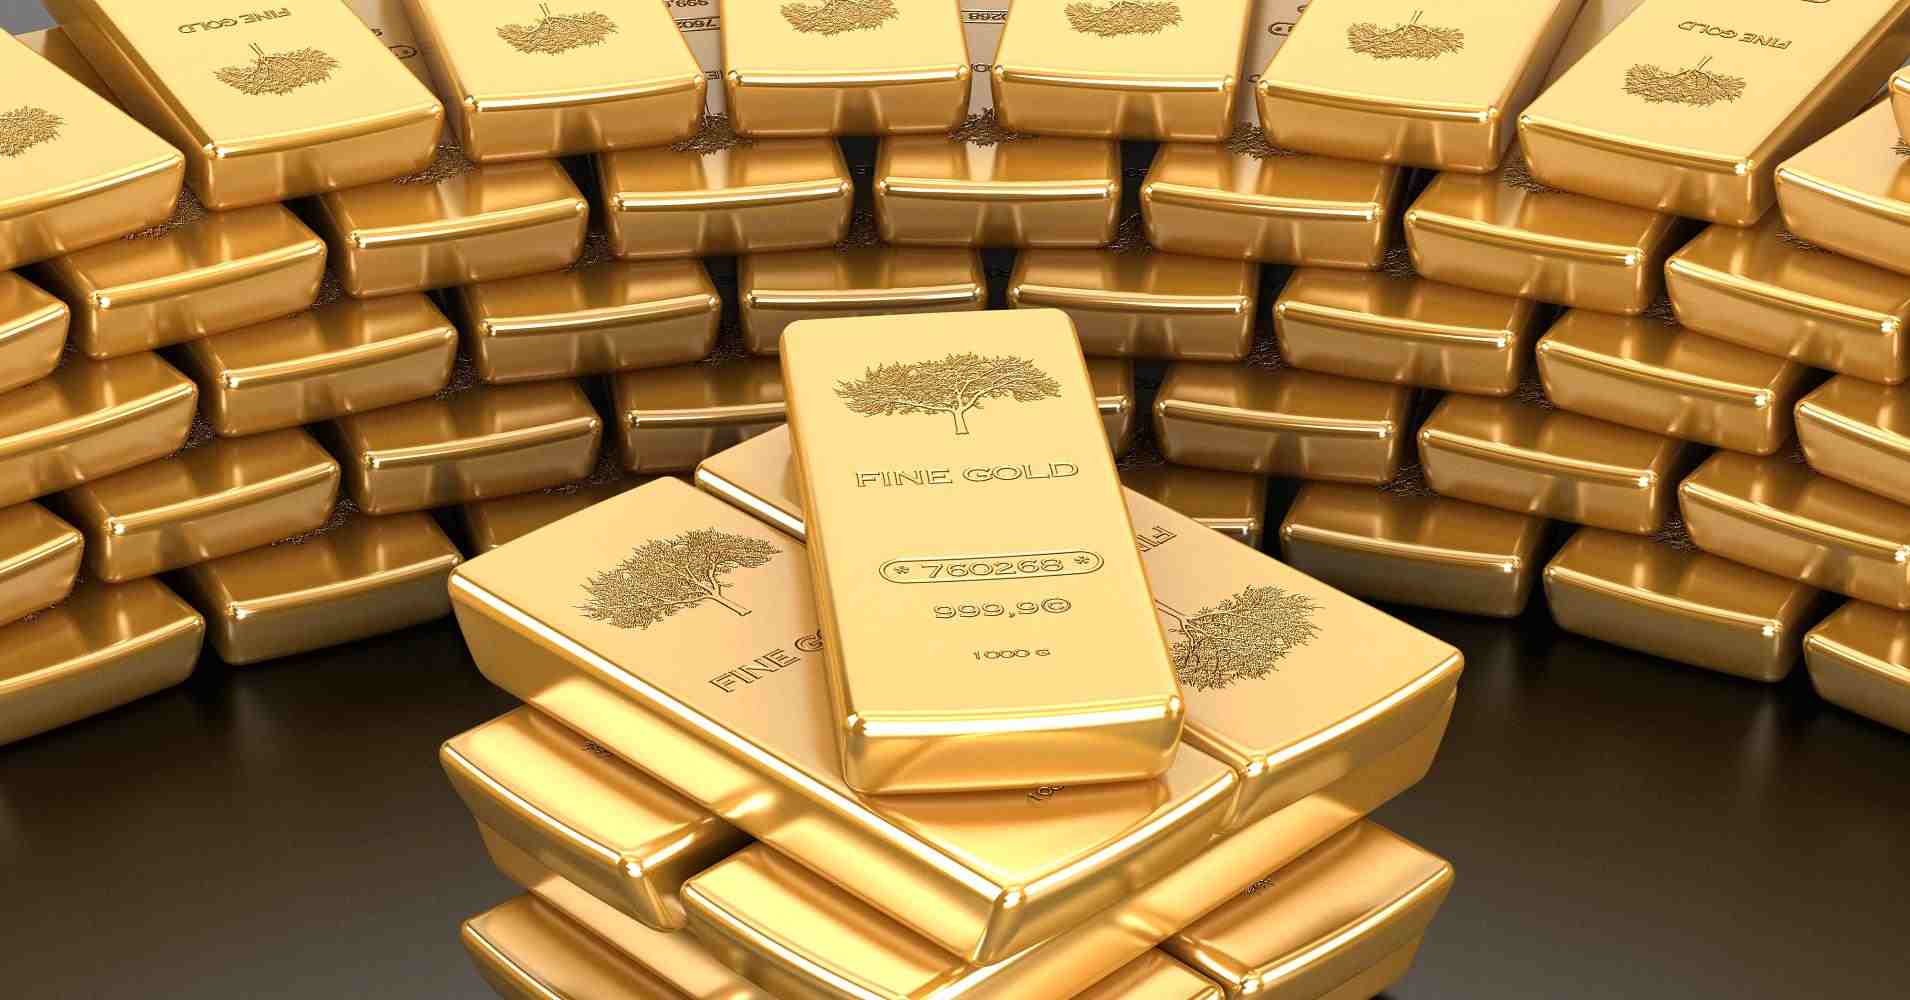 Iraq ranked 34th among countries with largest gold reserves